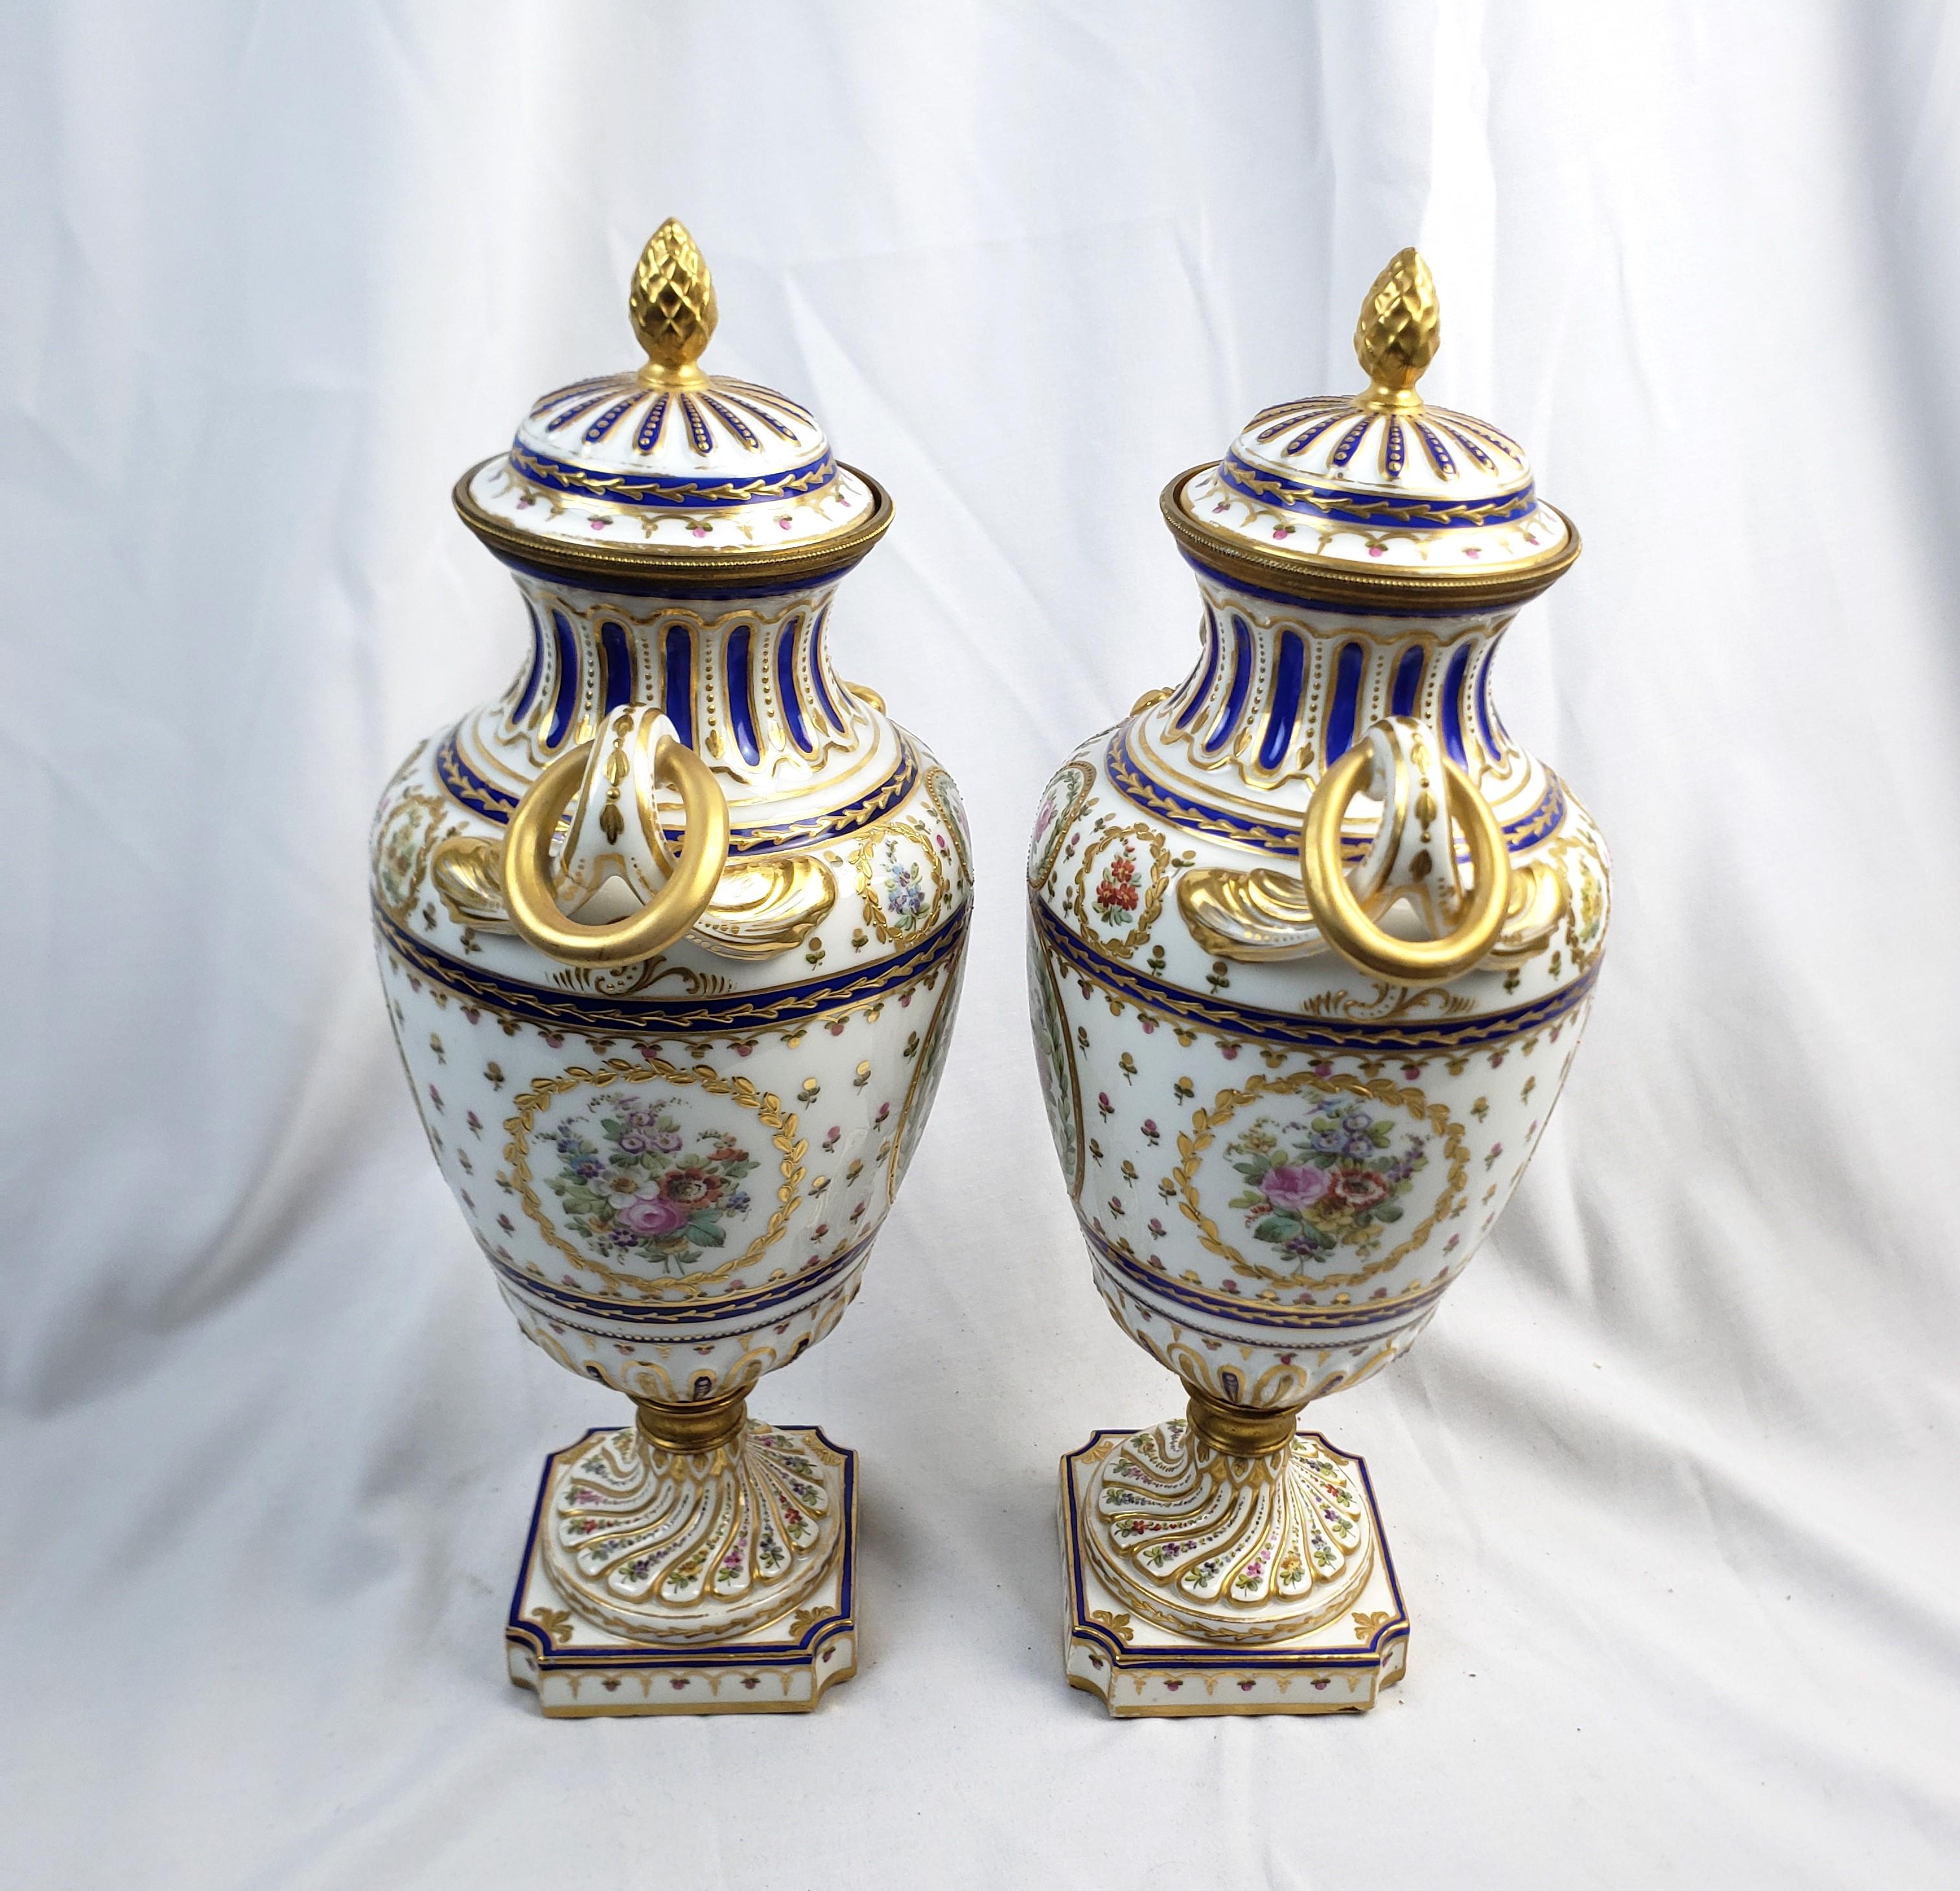 Porcelain Pair of Antique Sevres Styled Covered Urns with Ornate Hand-Painted Decoration For Sale